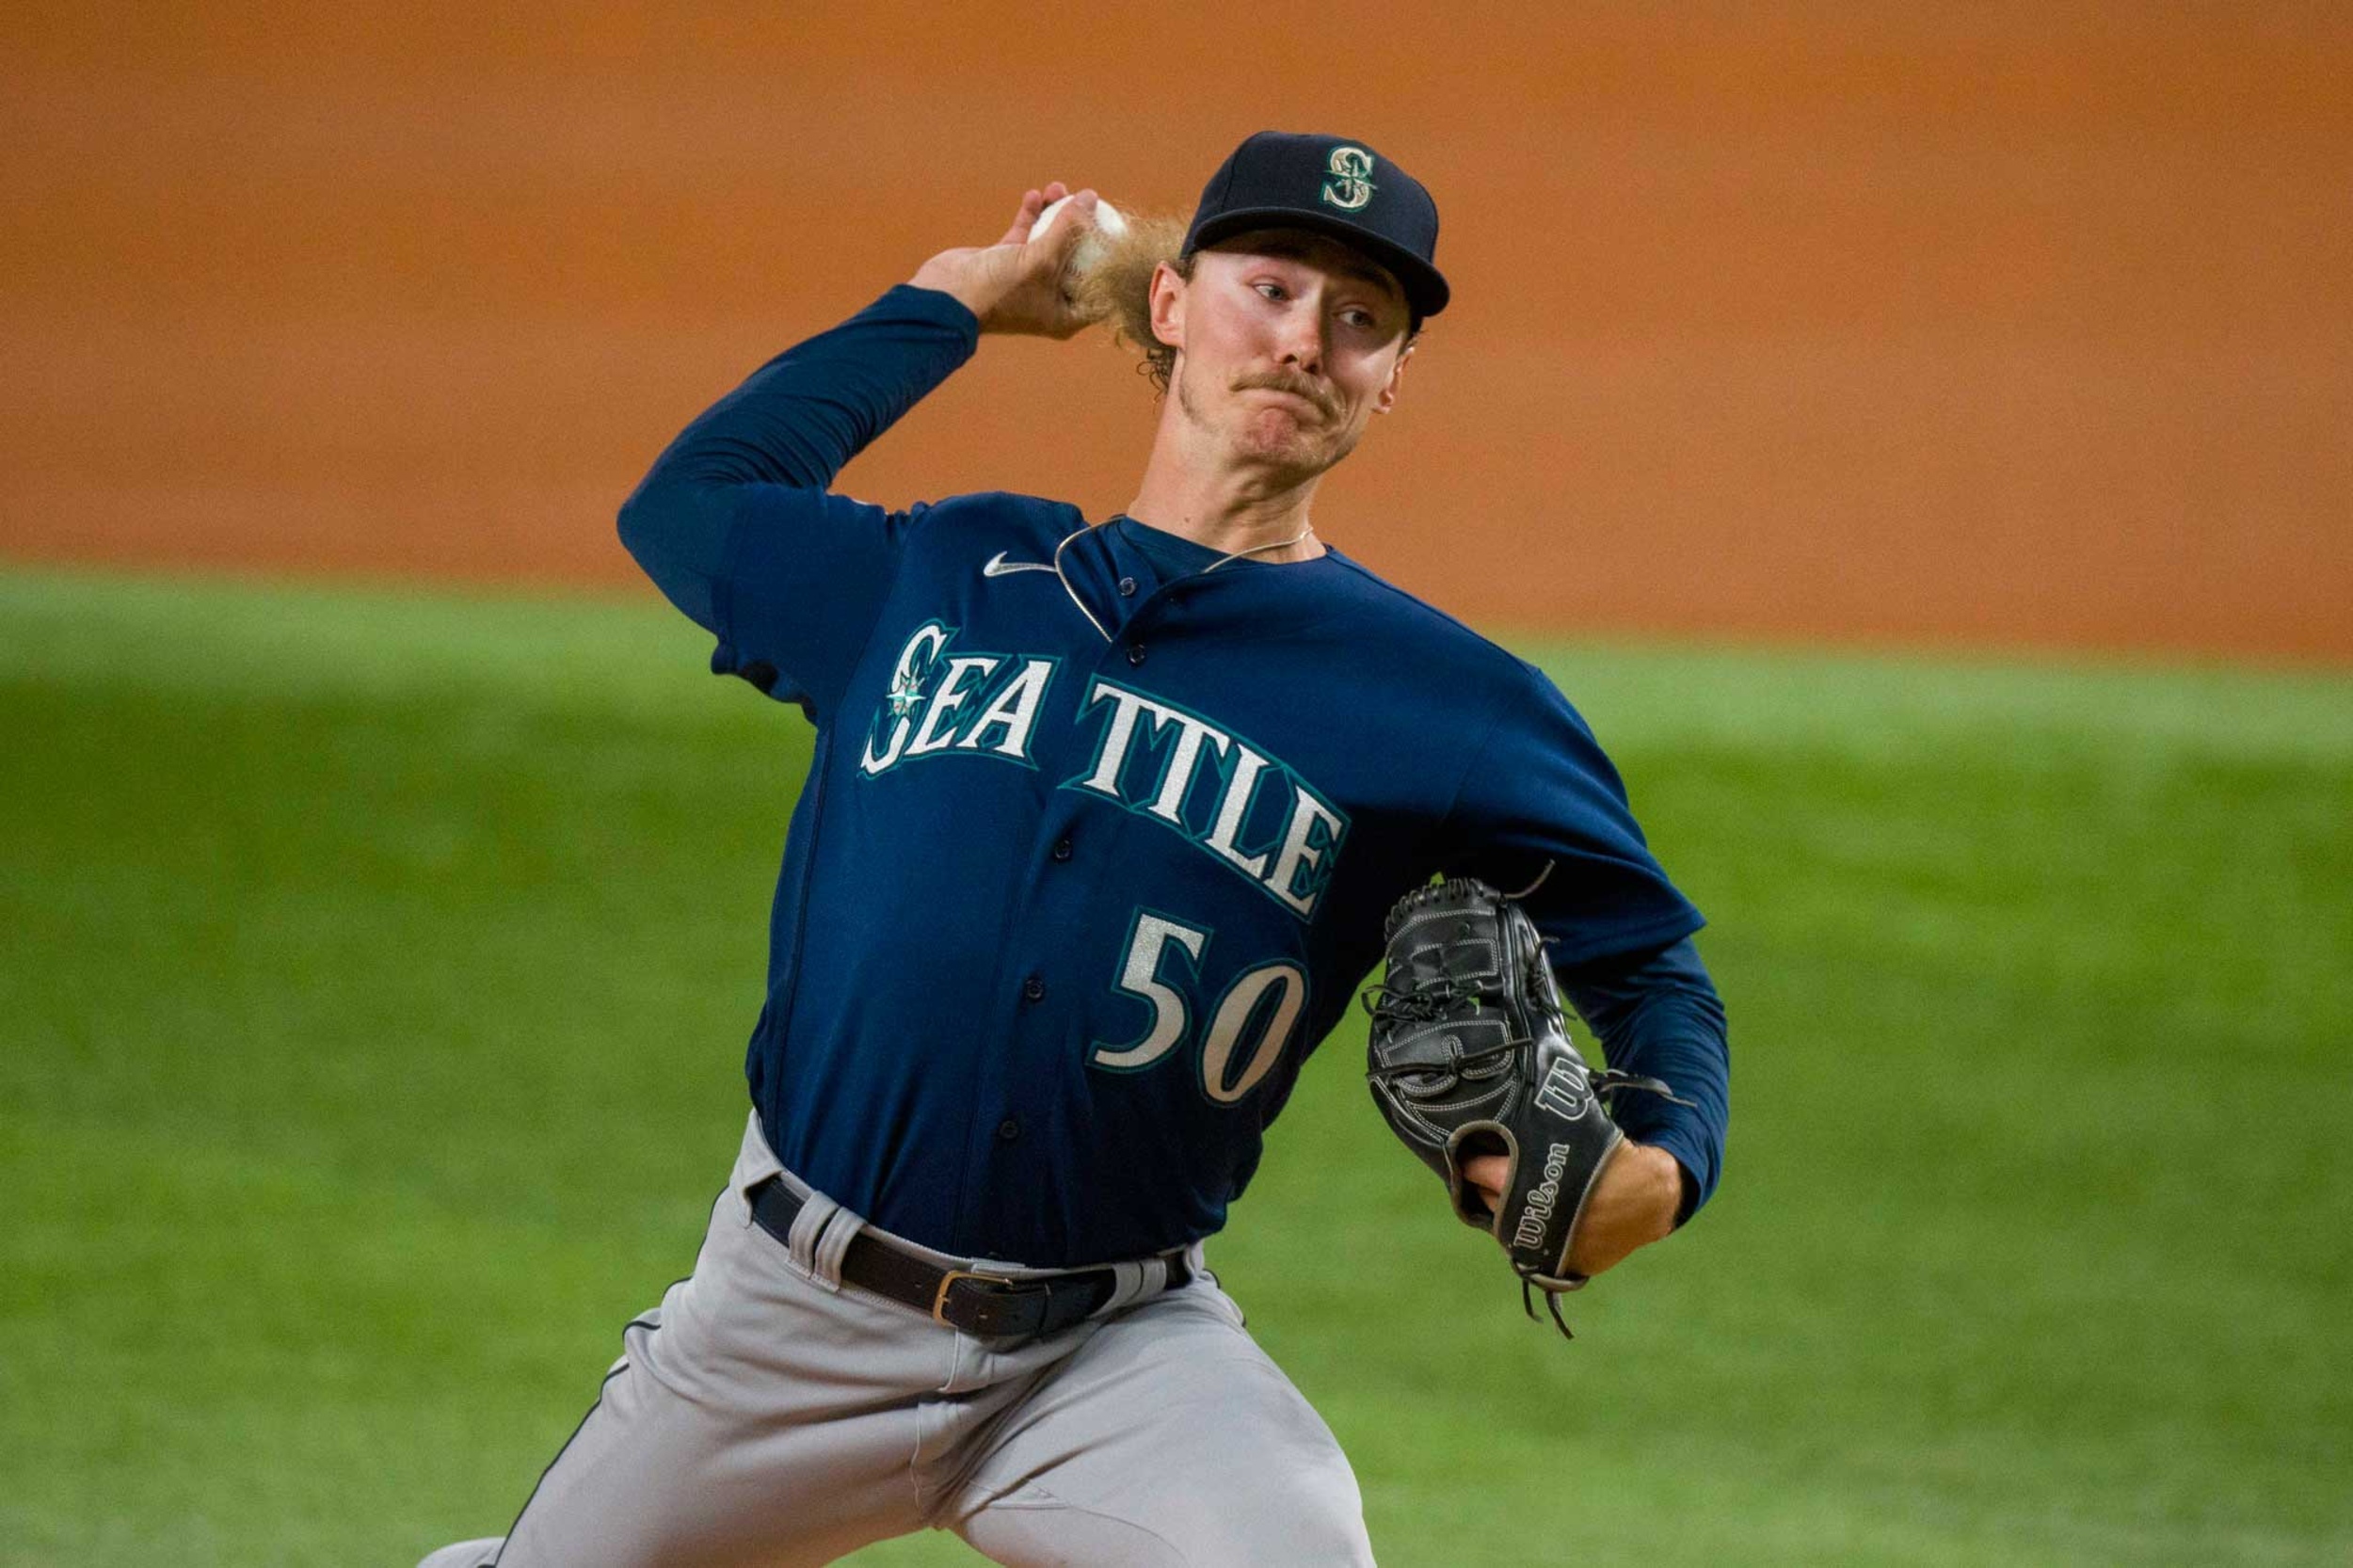 <p>Miller made an immediate impact when he was promoted early last season with an elite fastball and control, finishing with a 4.32 ERA in 25 starts. He has the ability to do more for the Mariners after working on his secondary pitches during the offseason and could help Seattle's rotation be one of the best in baseball behind George Kirby, Luis Castillo, and Logan Gilbert.</p><p>You may also like: <a href='https://www.yardbarker.com/mlb/articles/babe_ruth_career_retrospective_022724/s1__33507035'>Babe Ruth: Career retrospective</a></p>